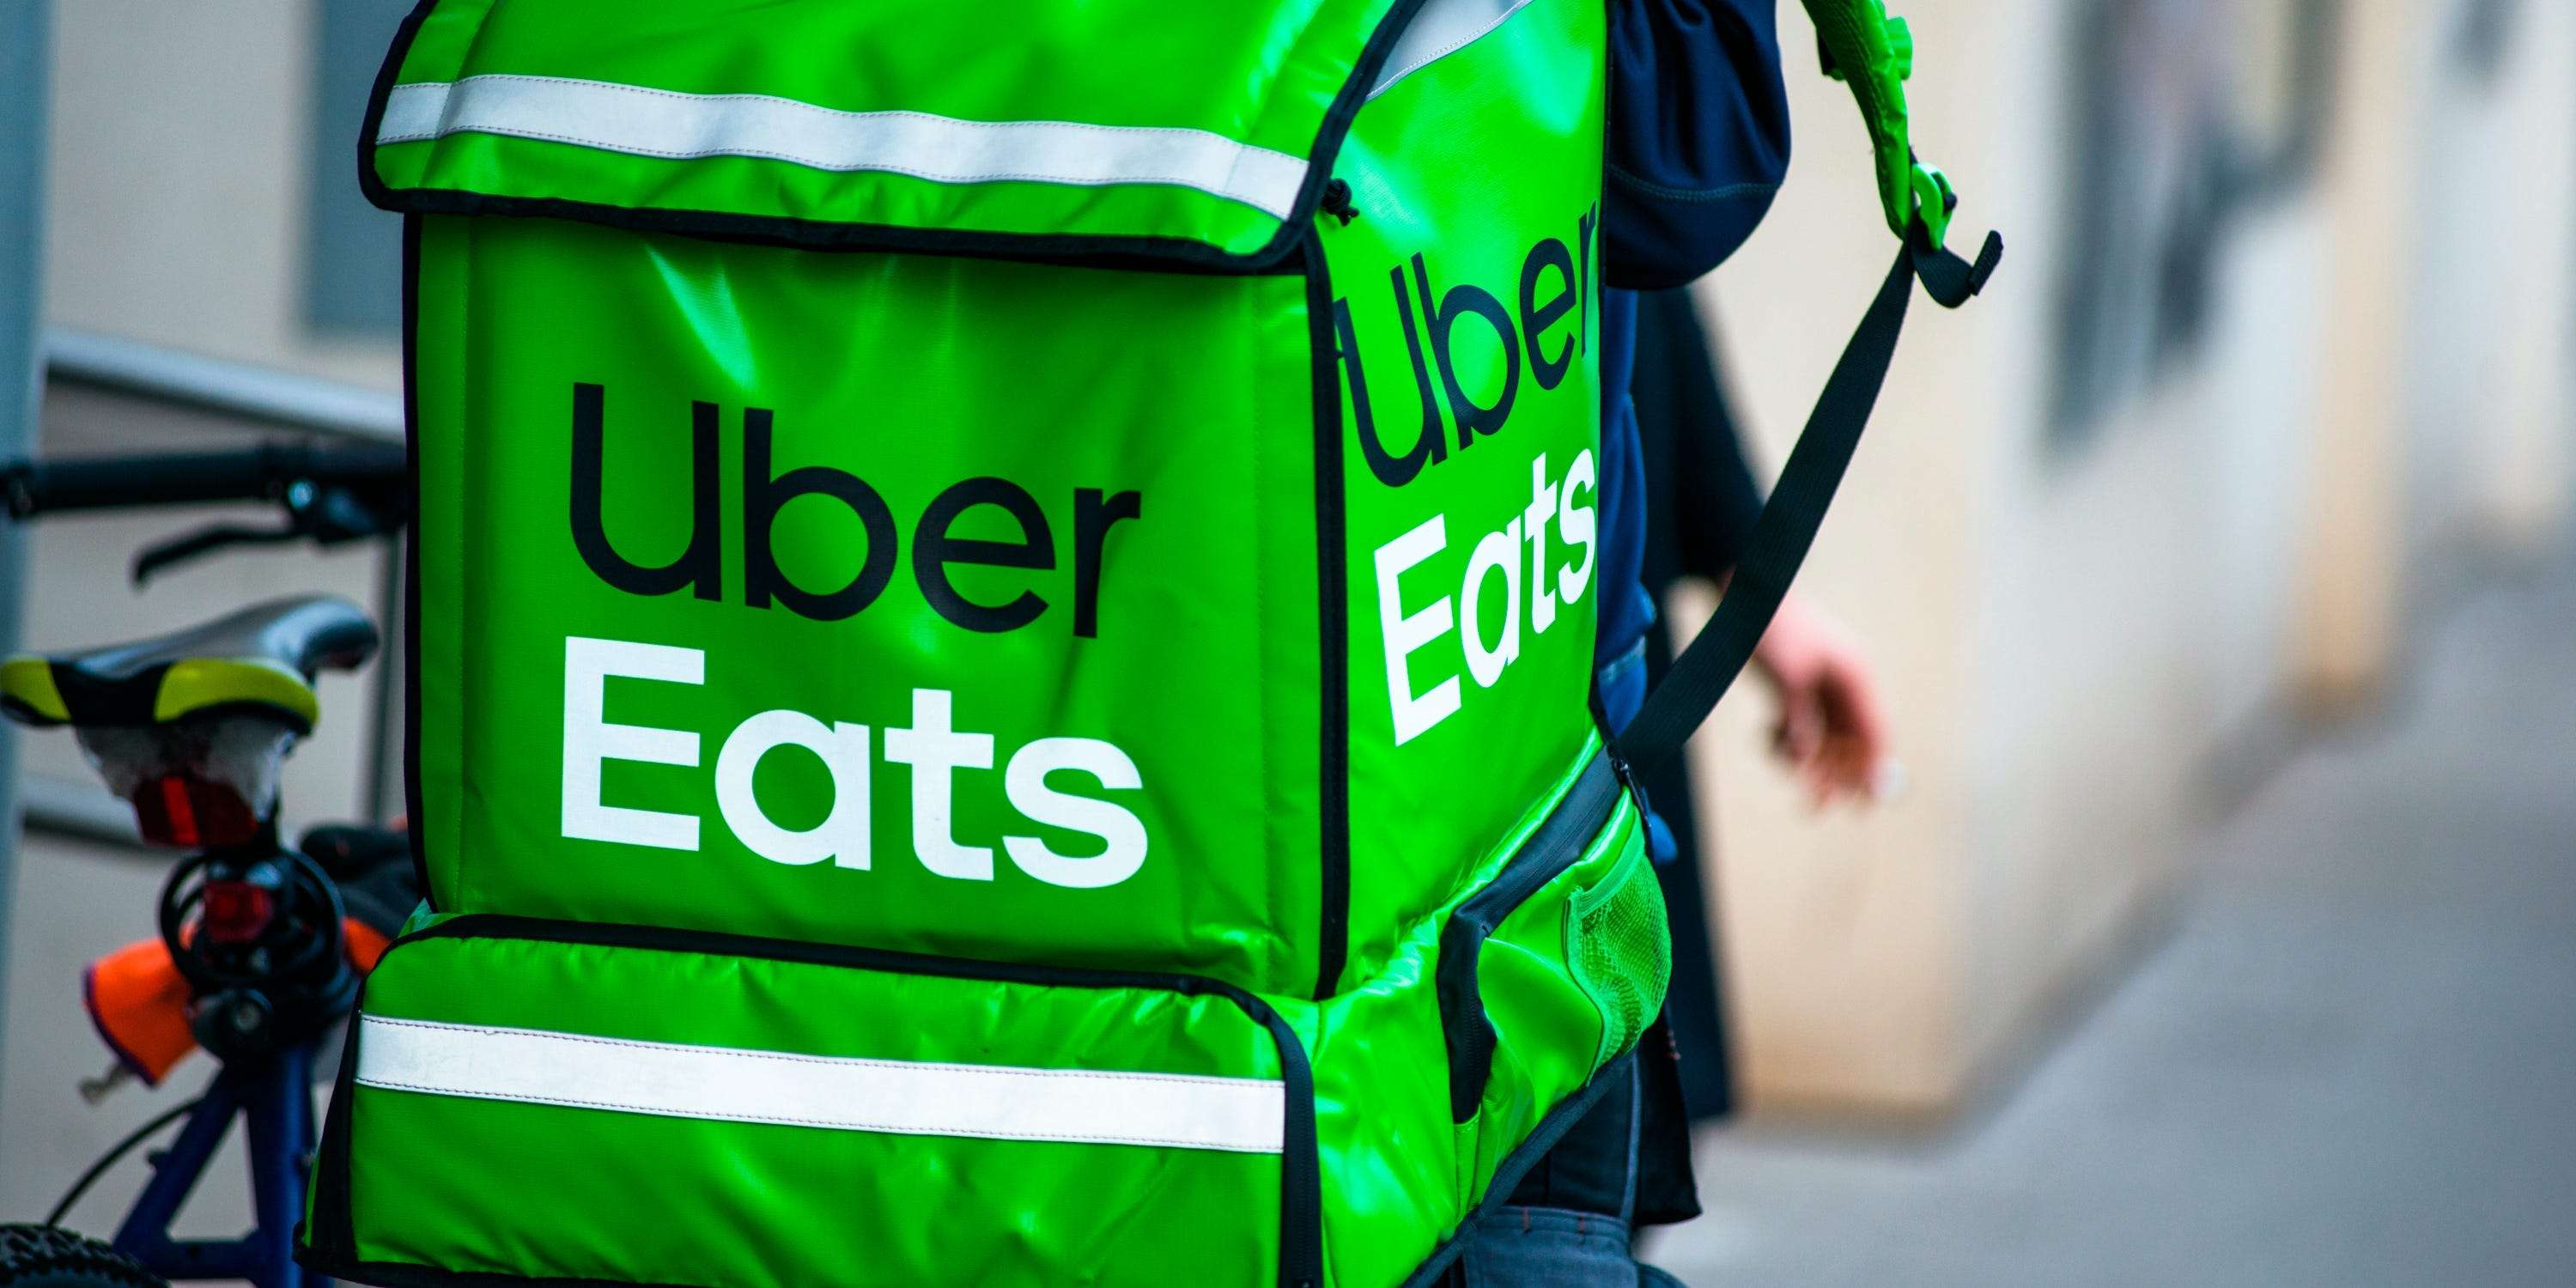 How To Contact Uber Eats About Issues With Orders